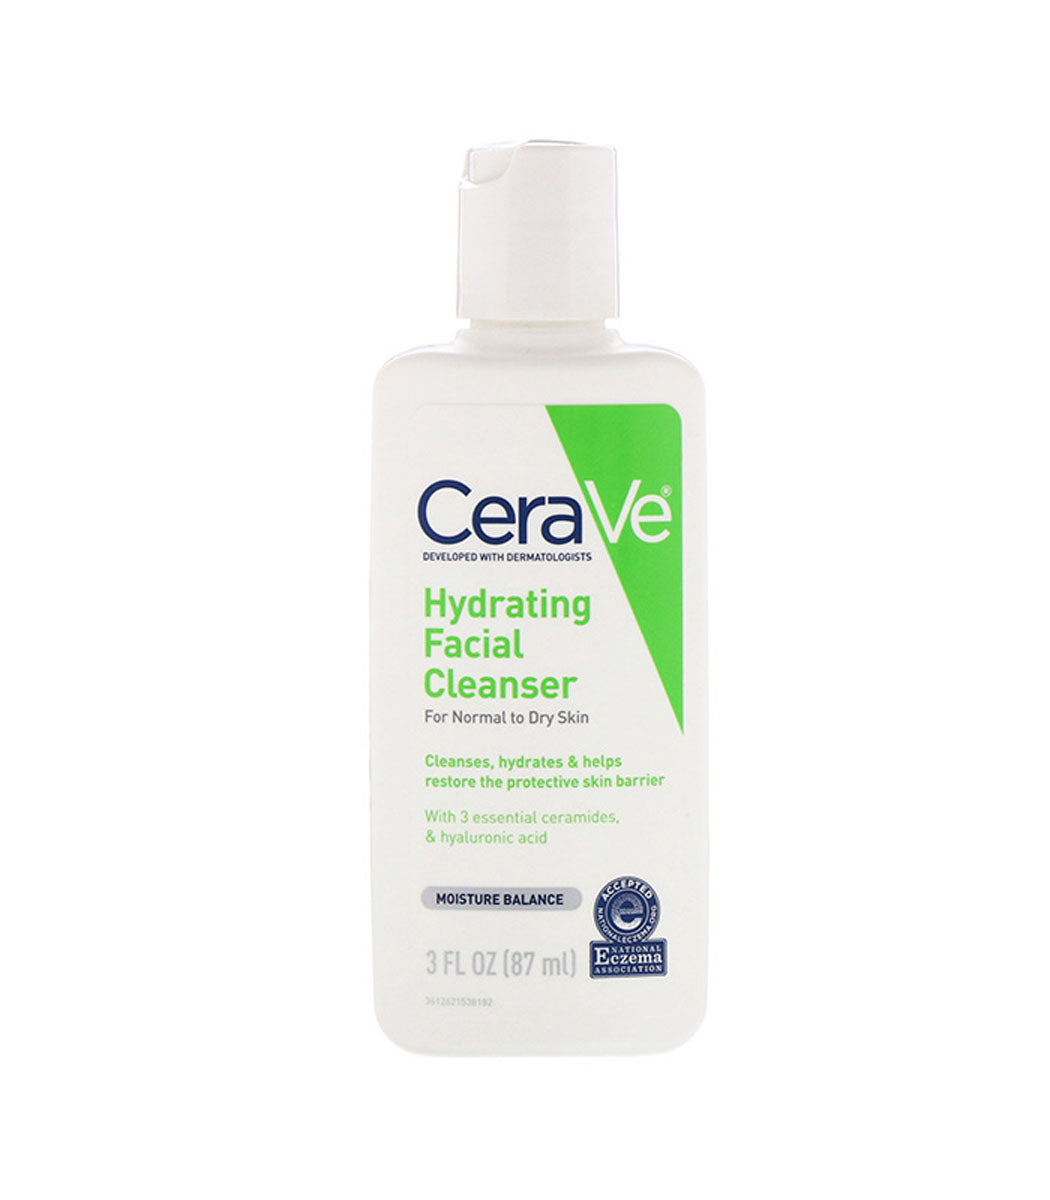 CeraVe - Hydrating Facial Cleanser - 87ml